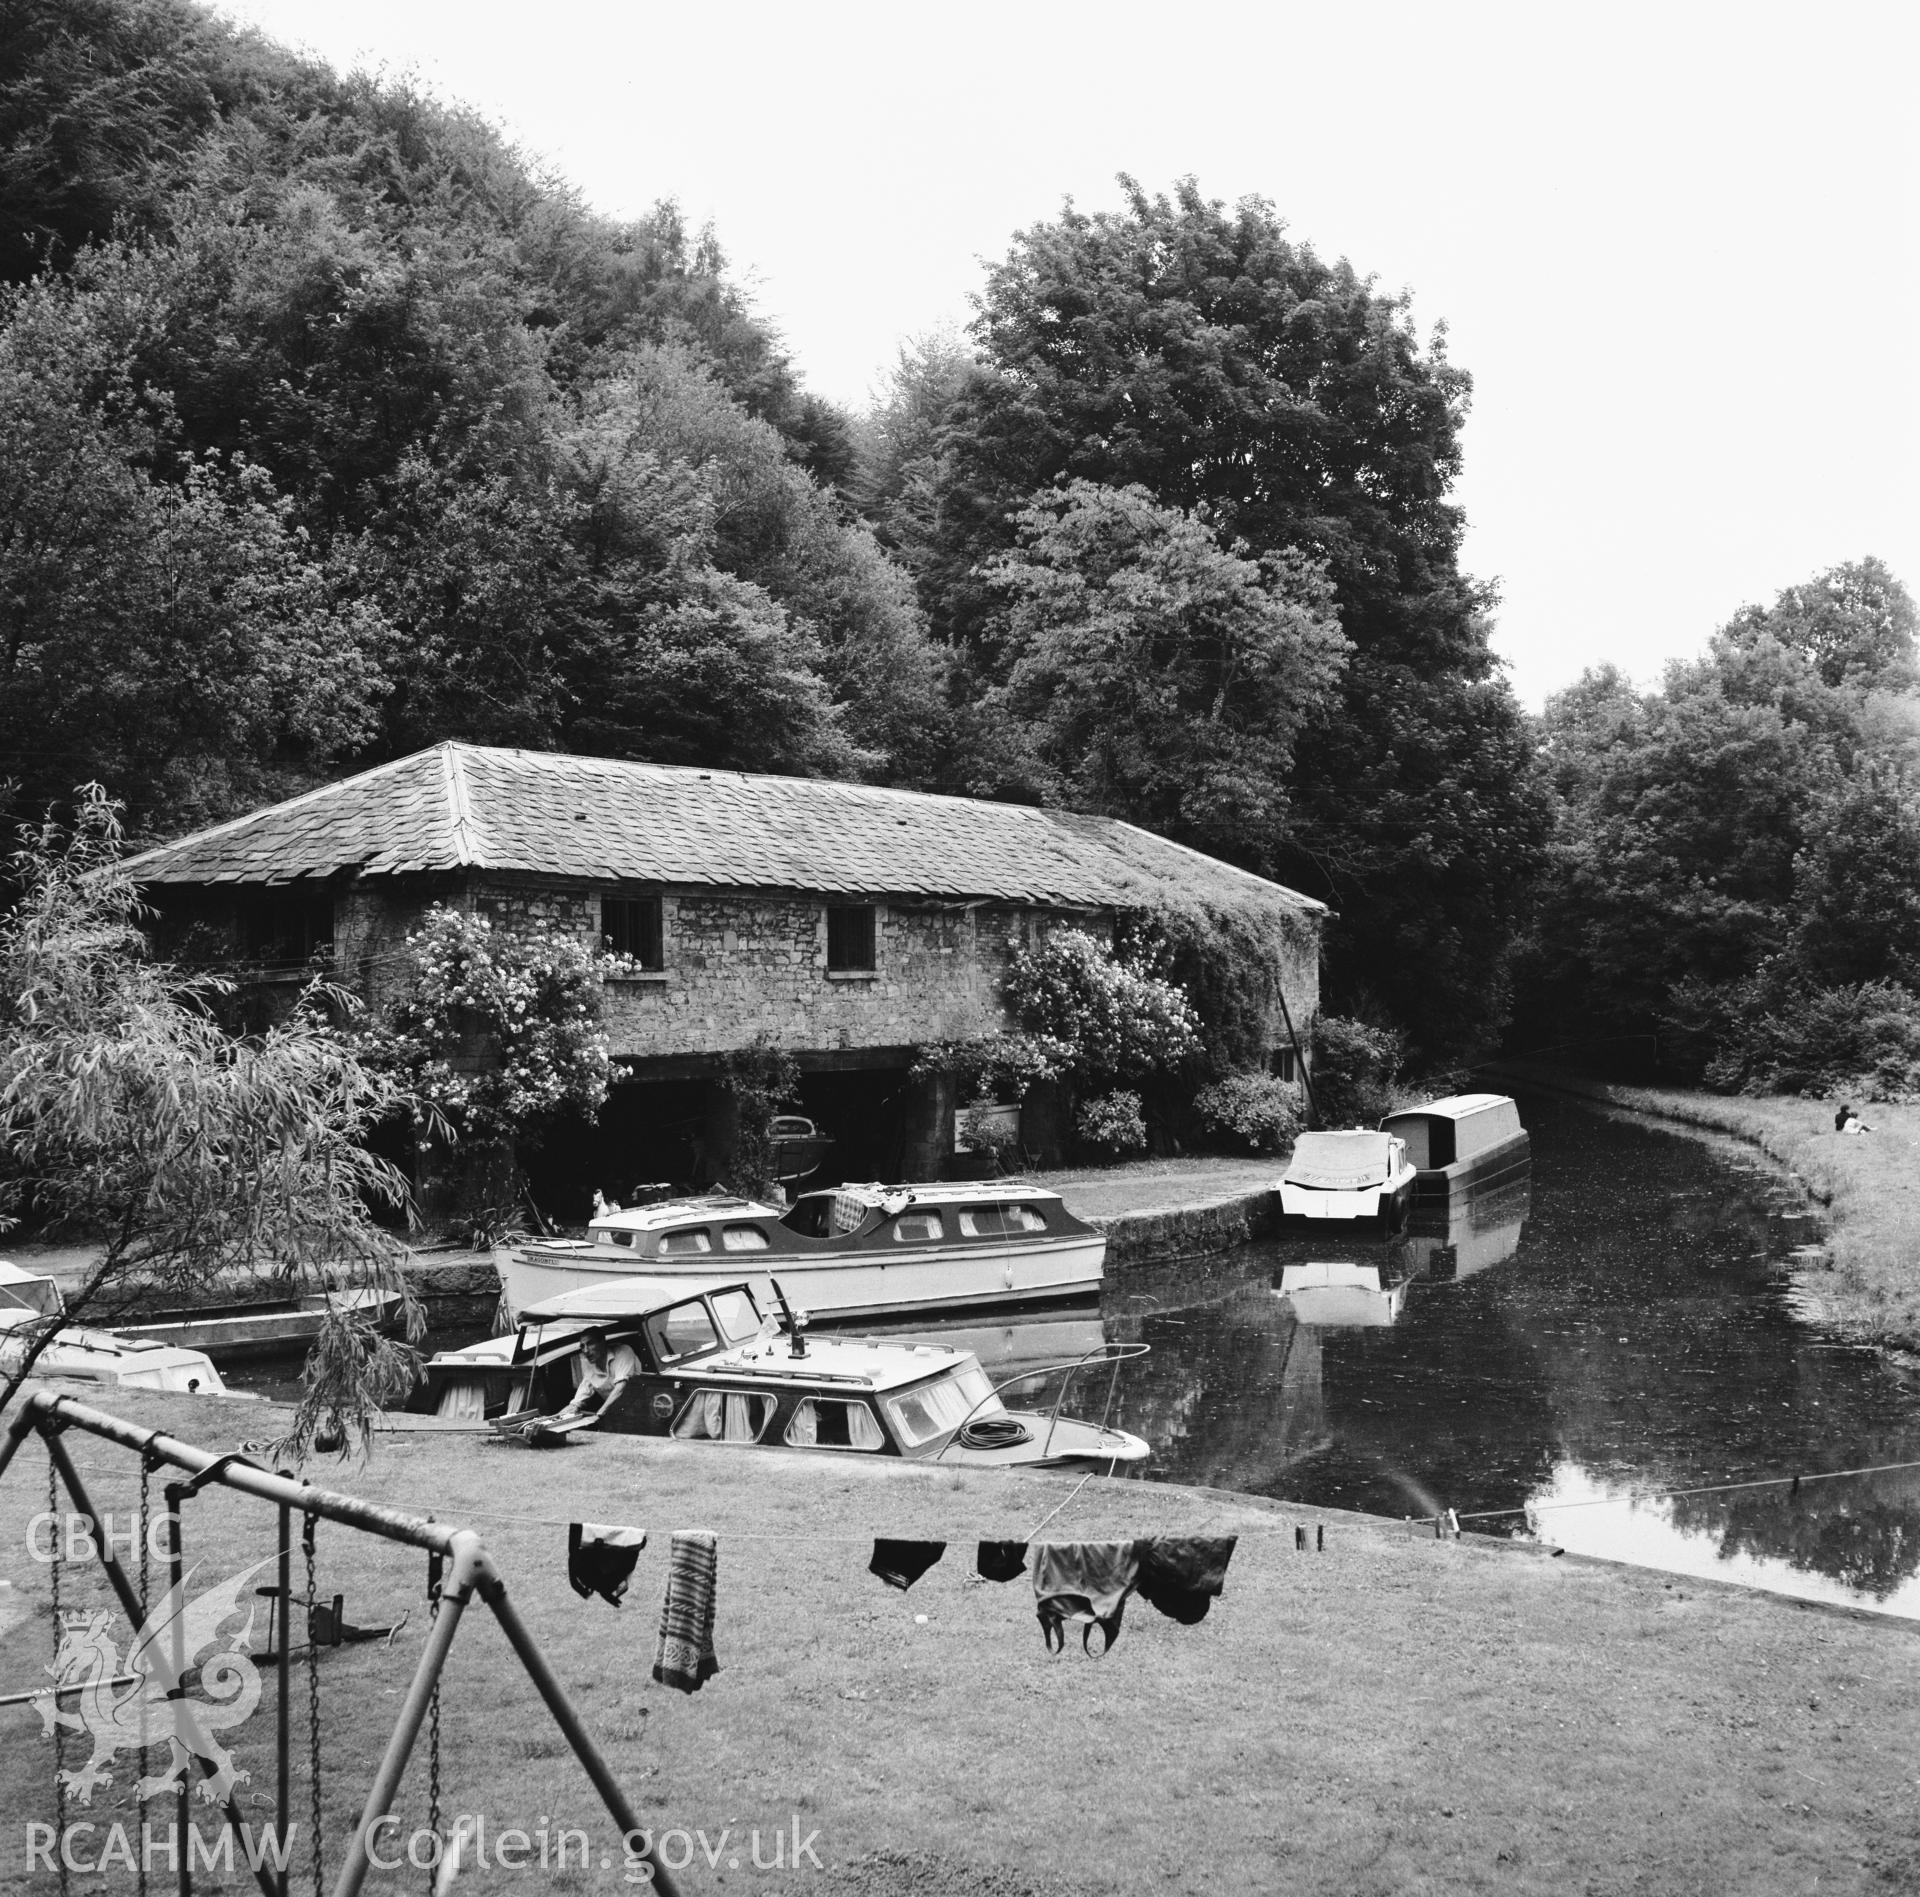 RCAHMW black and white photograph of Llanfoist Wharf, Brecknock and Abergavenny Canal.